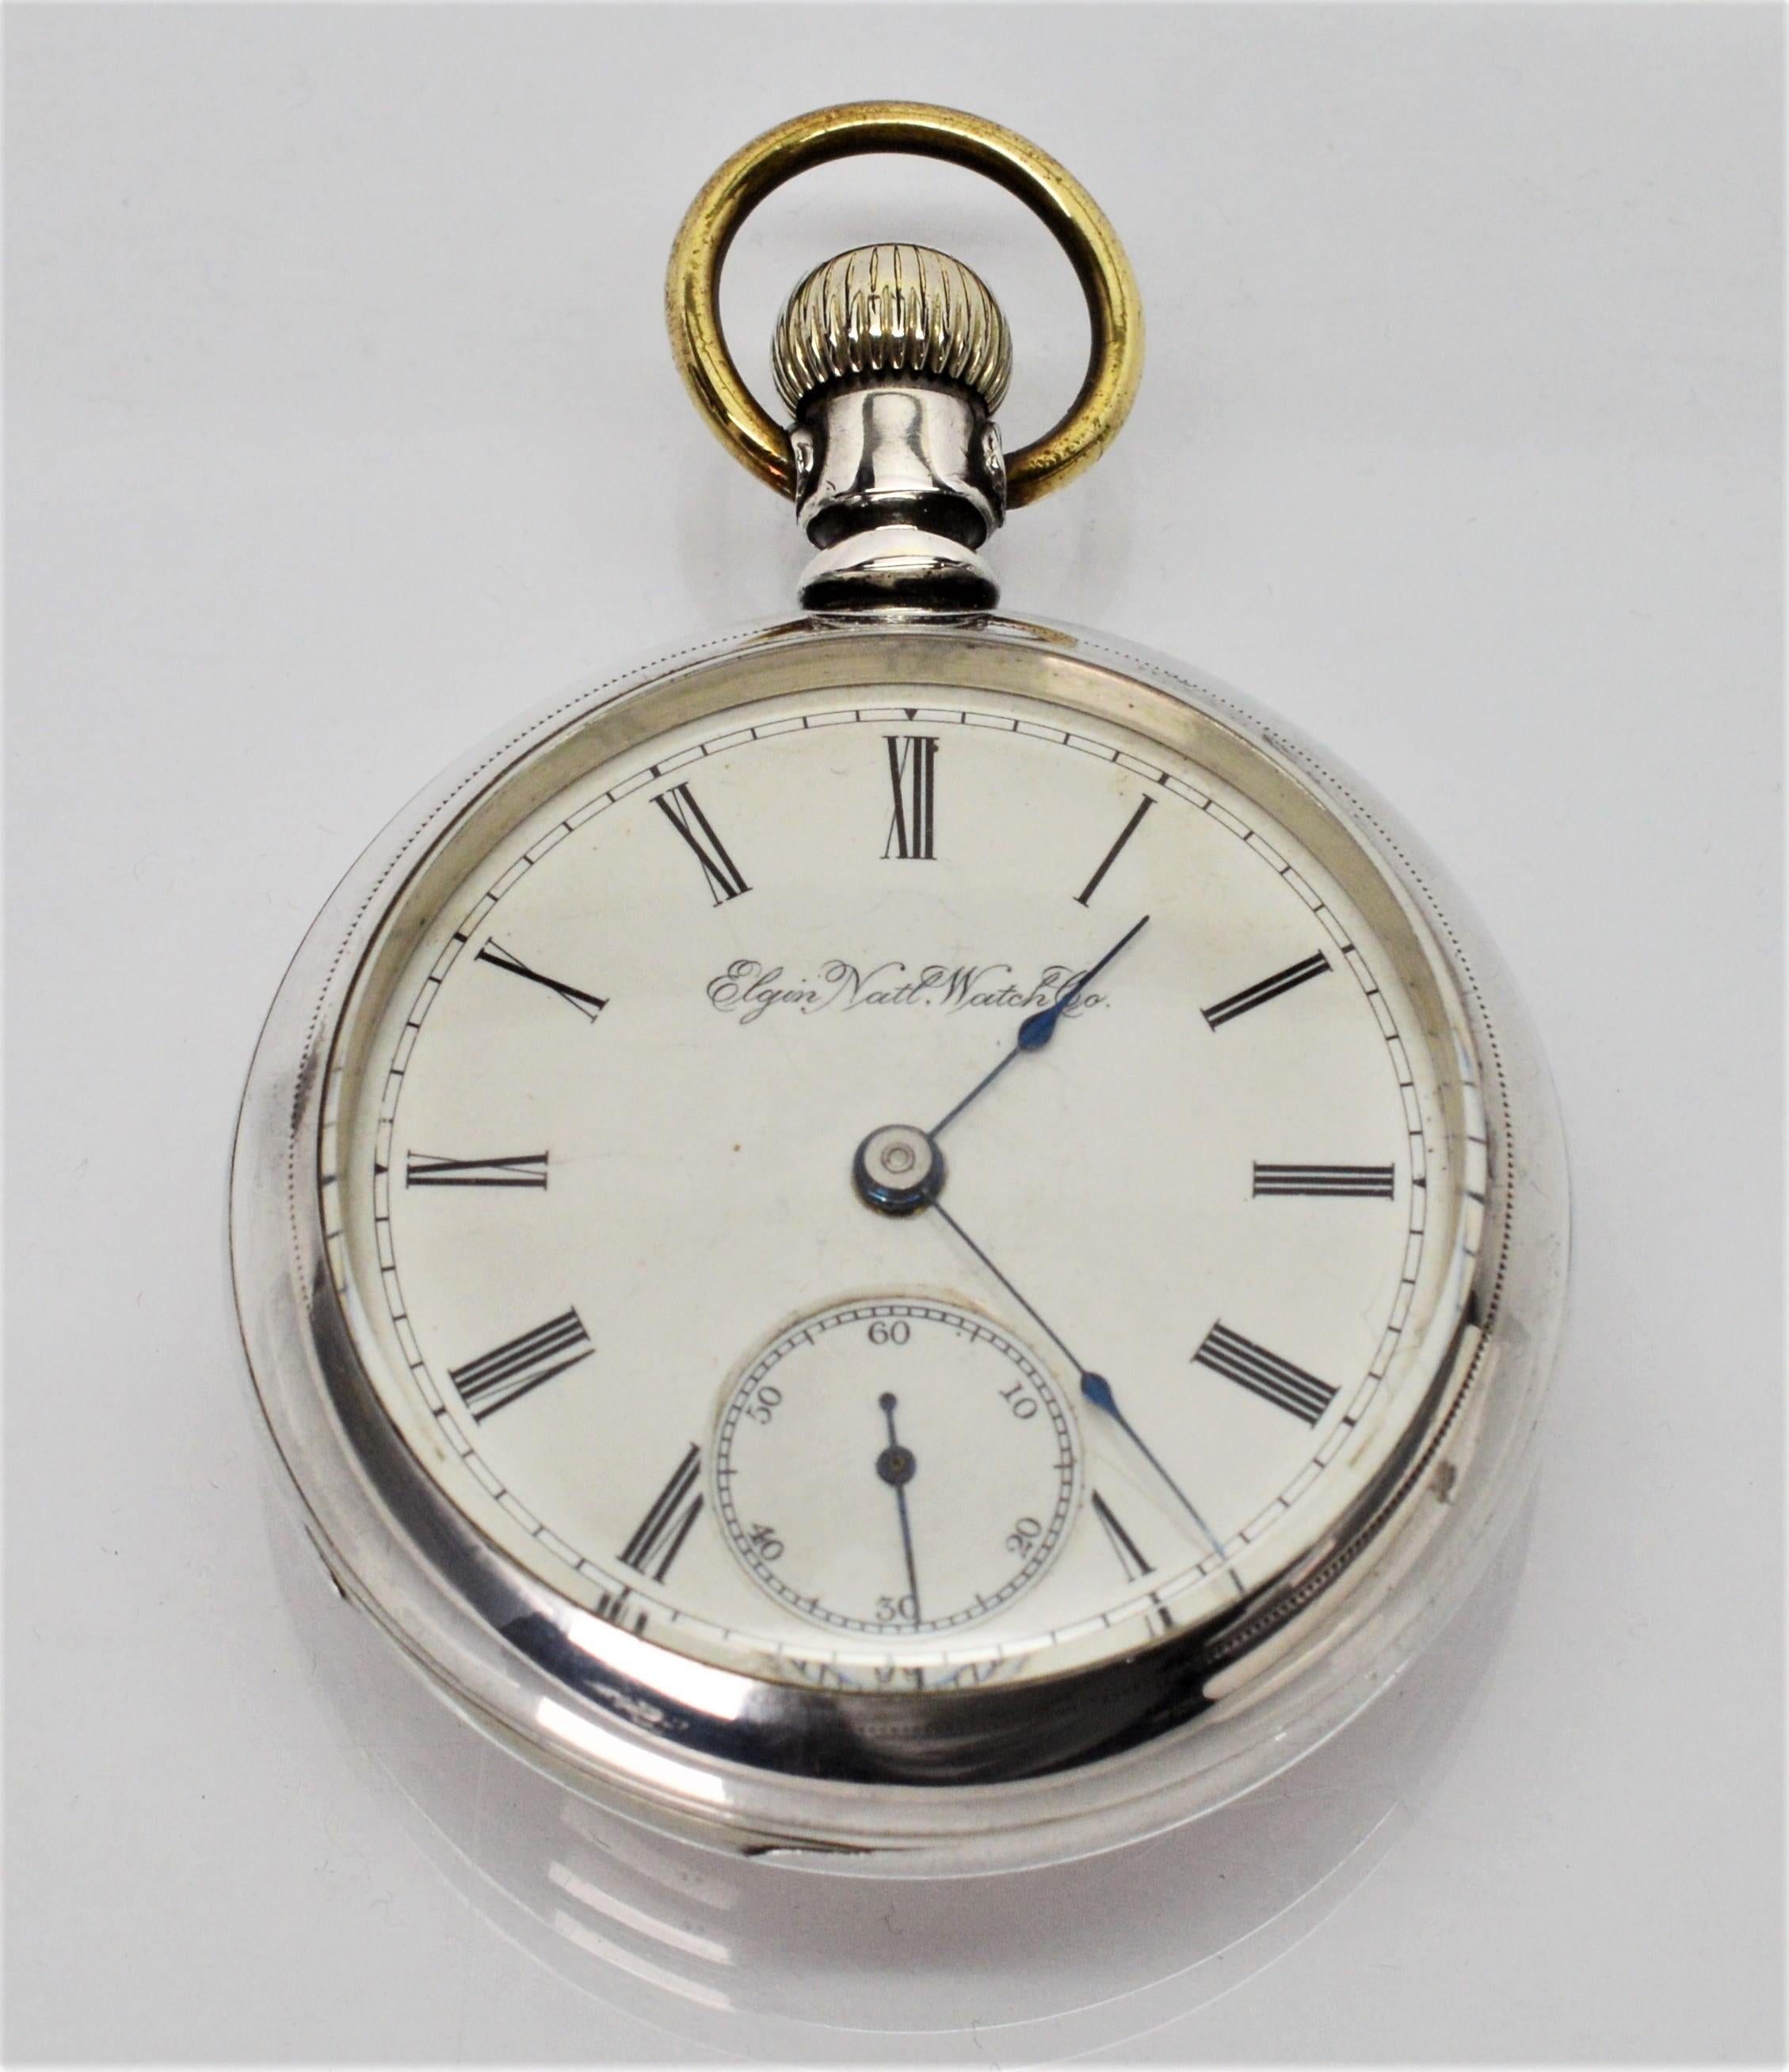 A beauty by Elgin National Watch Co. , circa 1890. With noticeable heft, this size 18S Model 5 Men's pocket watch is made with Fahys coin silver case #E656 and inlaid with a figure of a deer in gold on the case back. The white enamel face has Roman